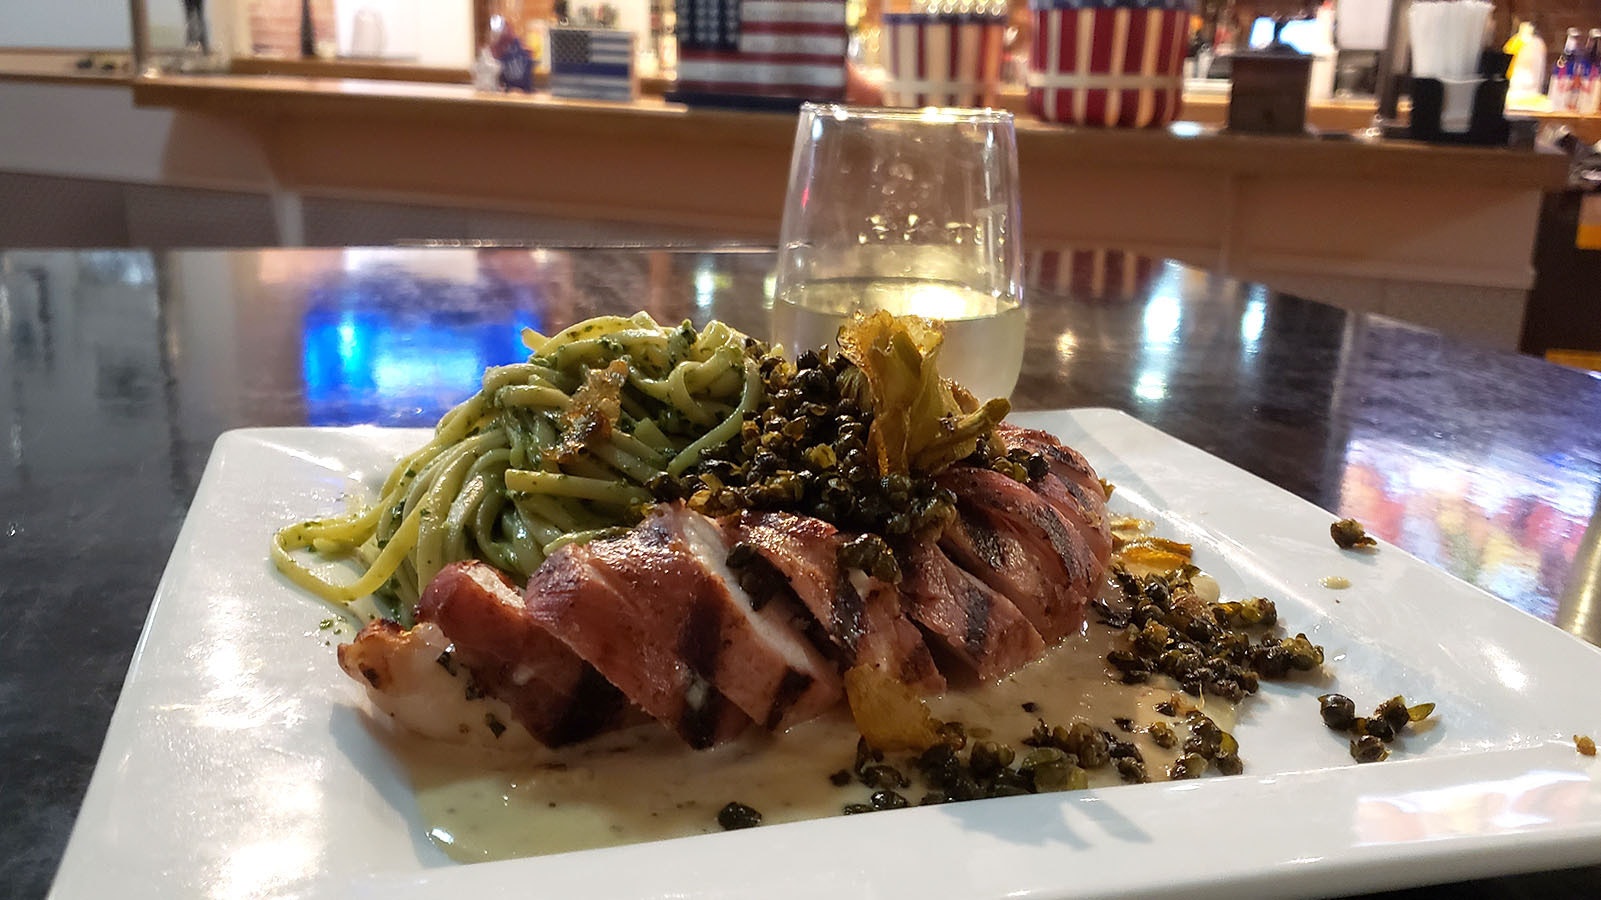 The chicken saltimbocca is what got Guy Fieri's attention. Unlike a typical saltimbocca, the Pie Zanos' version has been turned into a roulade and is served with a nest of pesto linguini with fried capers tossed over all of it.